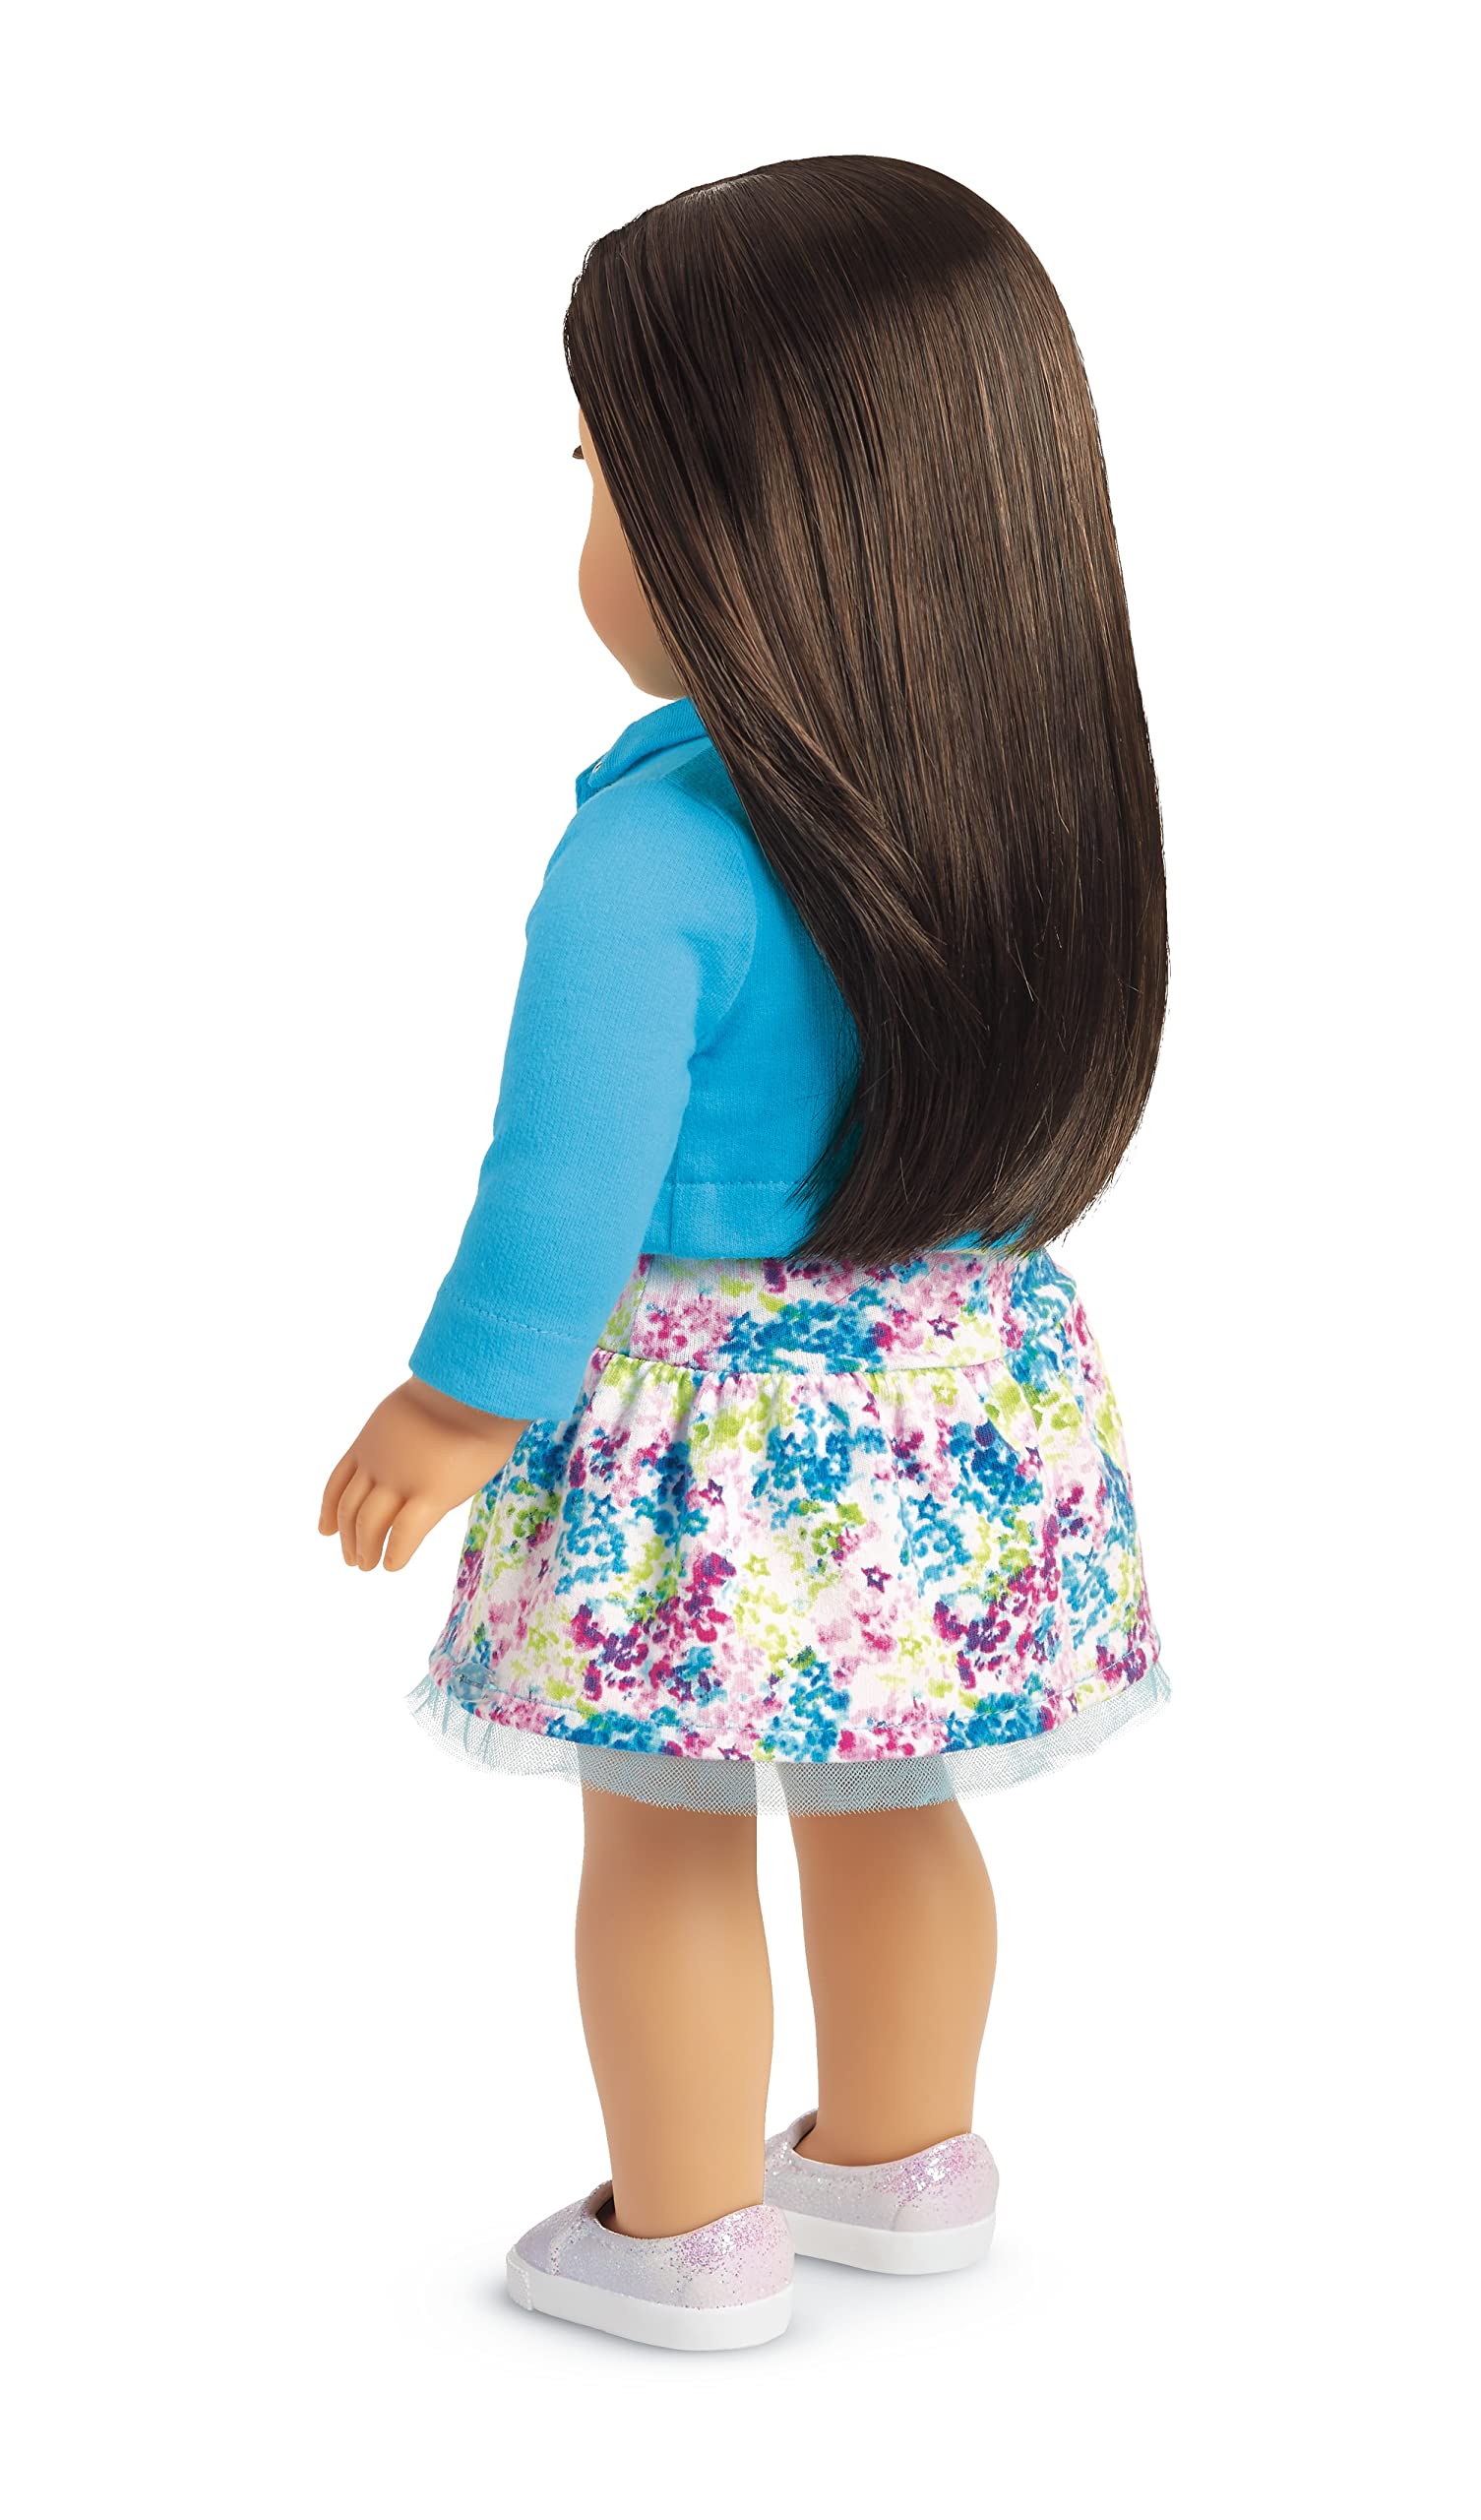 American Girl Truly Me 18-inch Doll #60 with Blue Eyes, Black-Brown Hair, and Light Skin Tone with Neutral Undertones